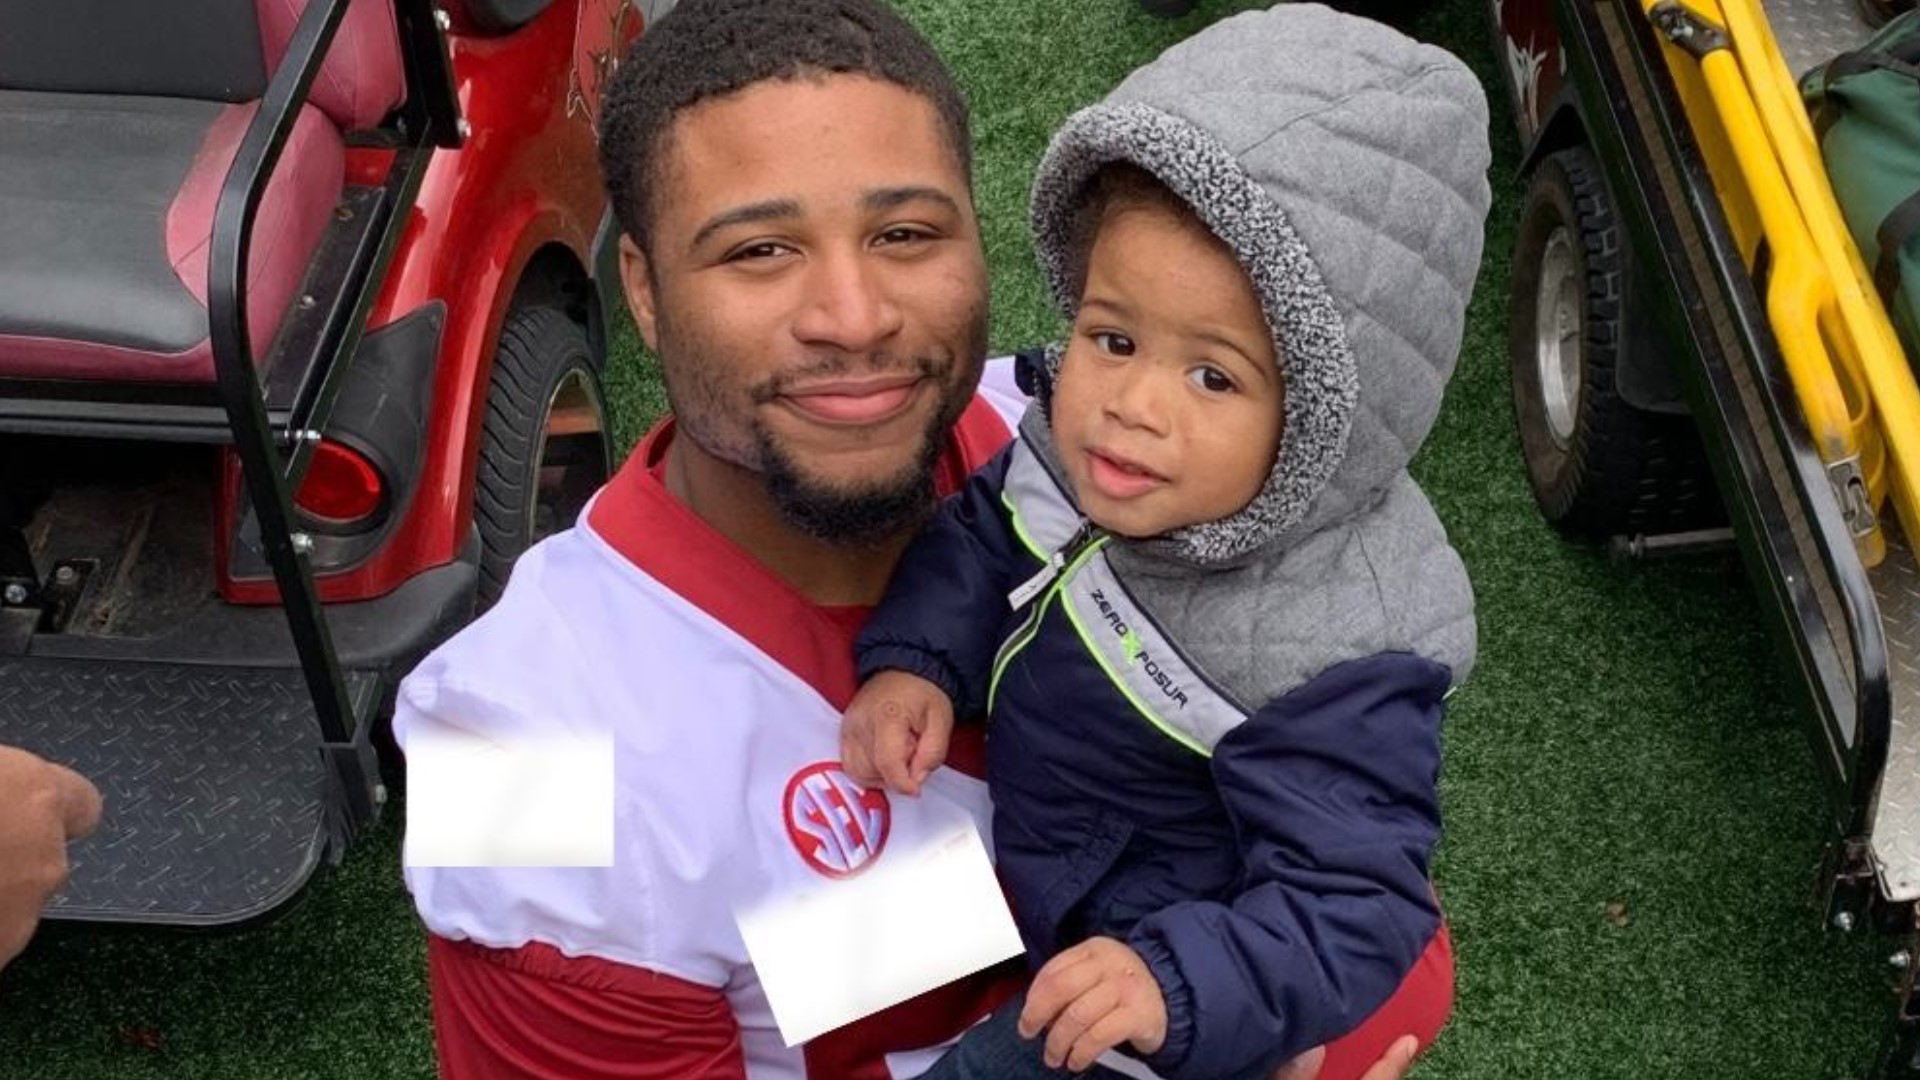 Arkansas wide receiver Koilan Jackson announced a partnership with the Legacy Letter Challenge Tuesday, designed to help fathers write letters of love to their kids